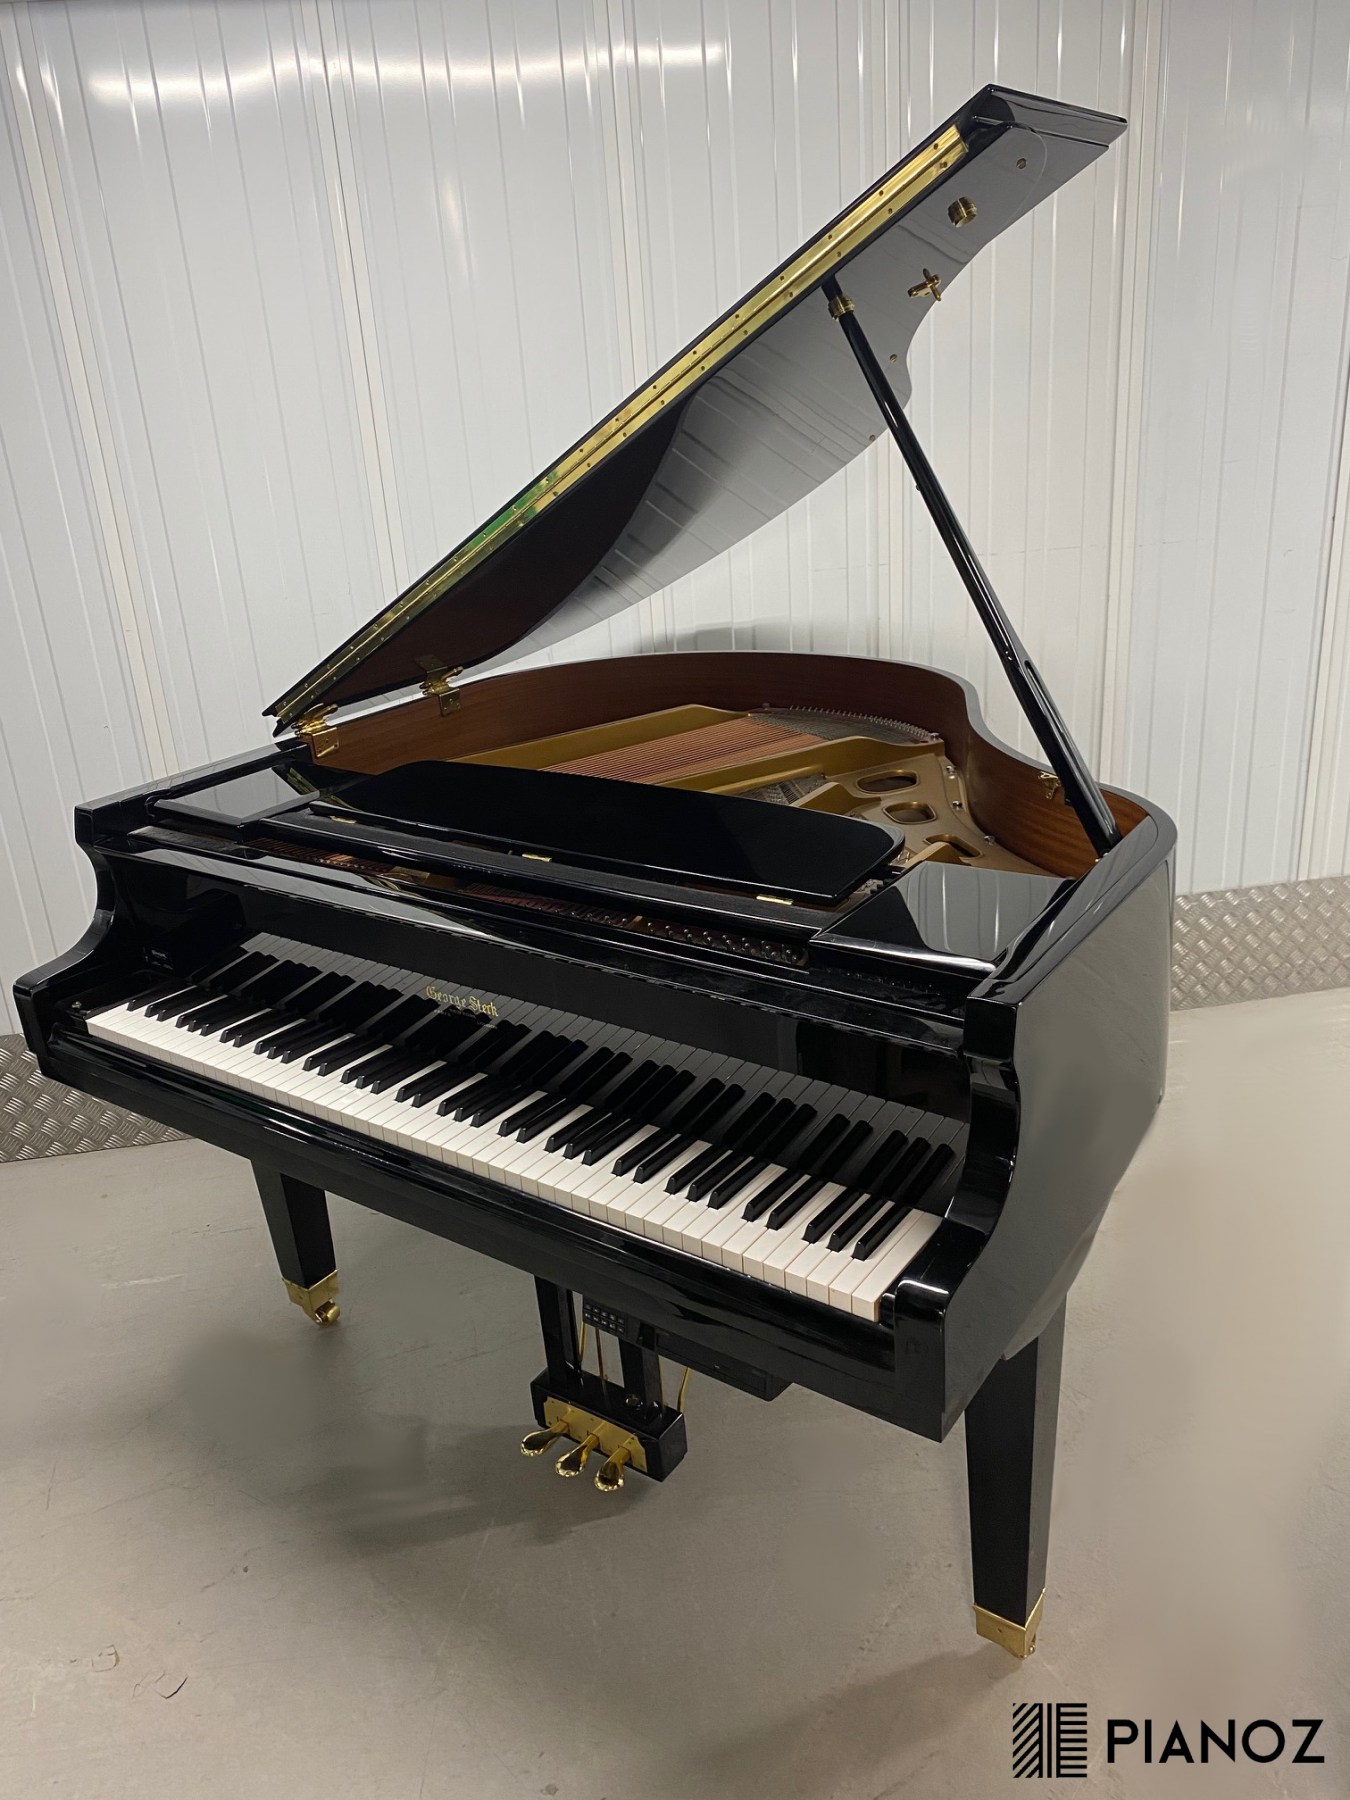 George Steck Pianodisc Baby Grand Piano piano for sale in UK